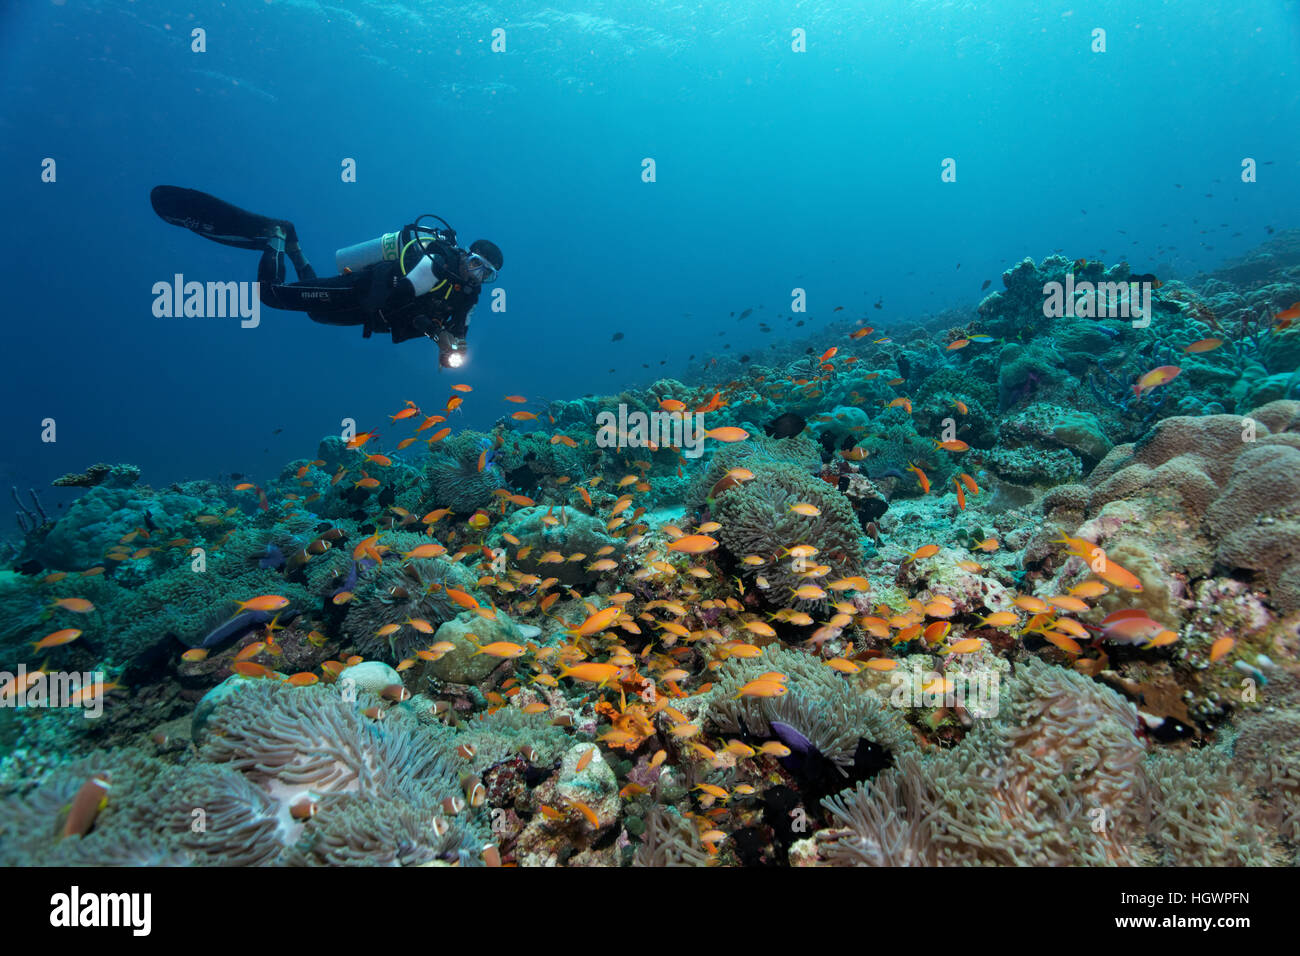 Coral reef with magnificent sea anemones (Heteractis magnifica), and yellow tilefish (Anthiidae), diver observing Stock Photo